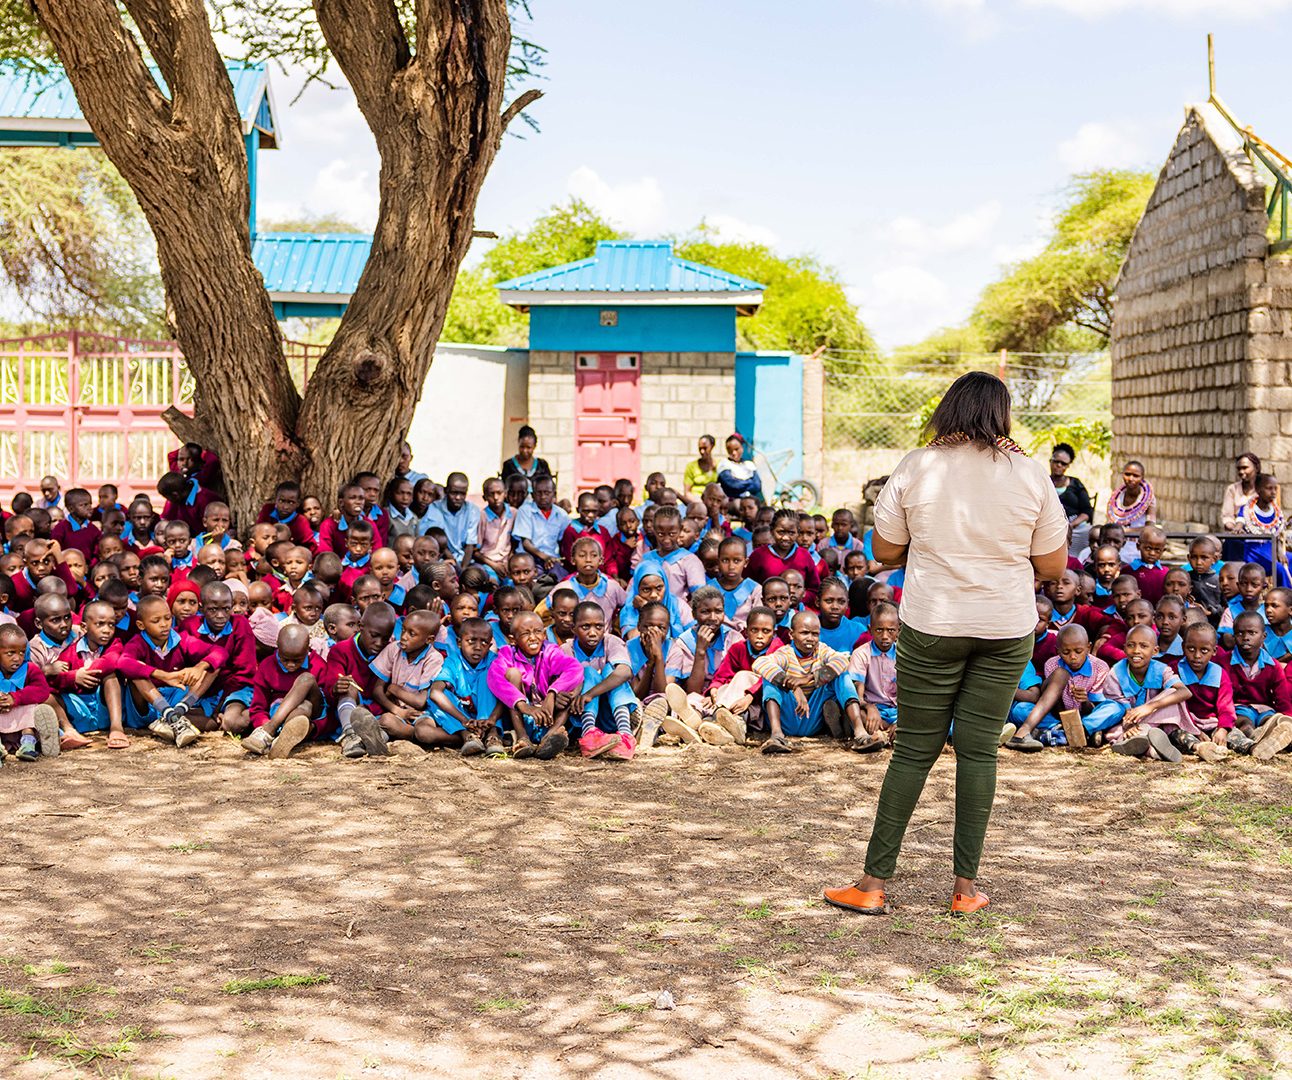 A woman stands with her back to the camera, facing a crowd of dozens of Kenyan school children sitting on the ground